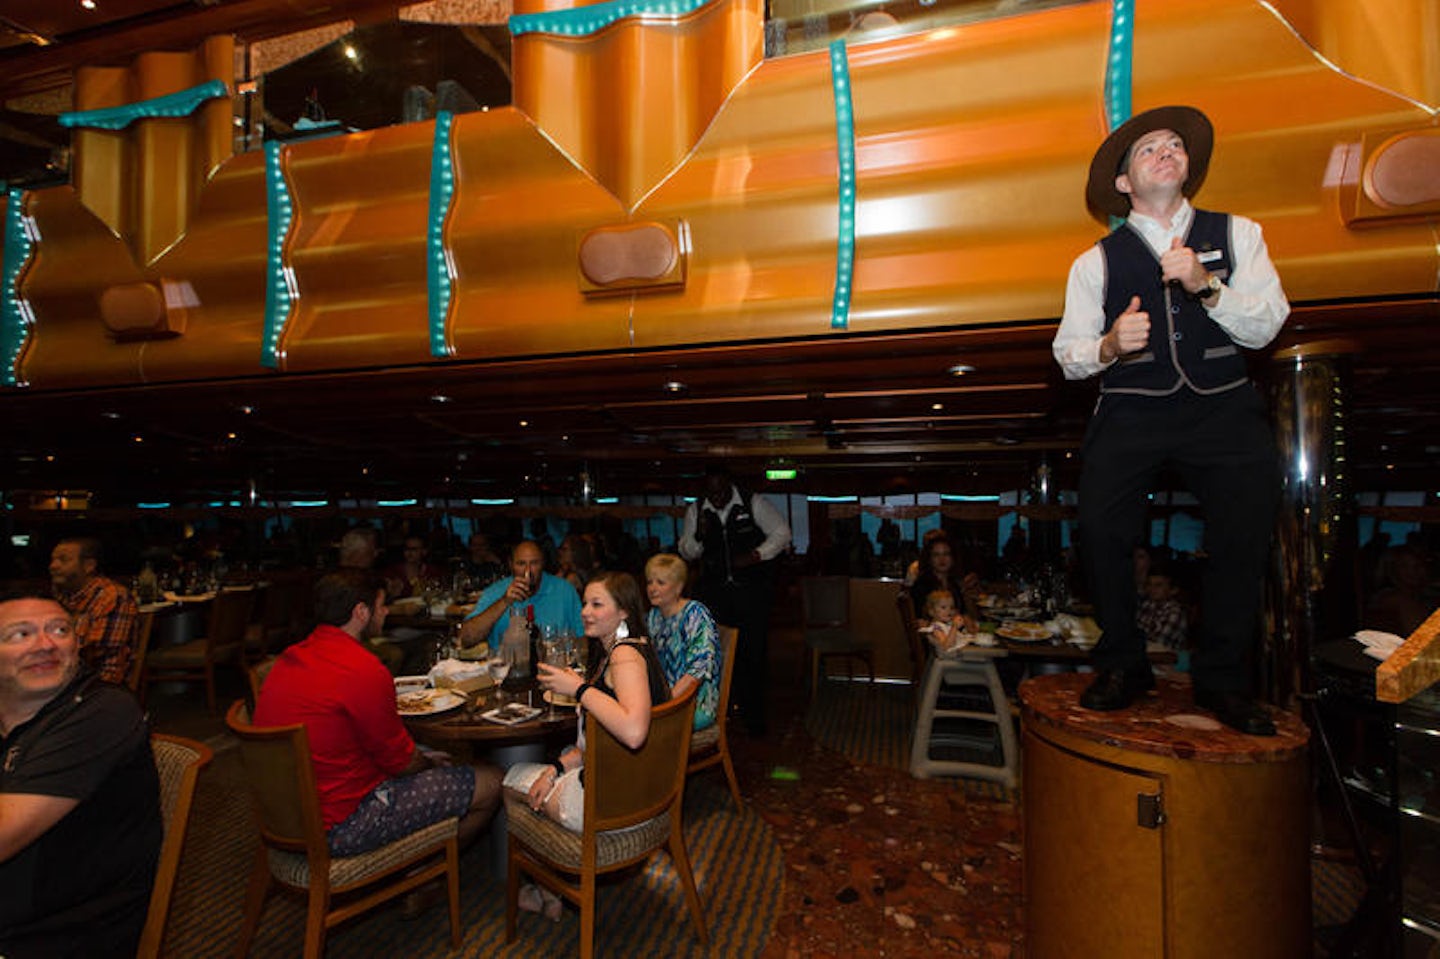 Northern Lights Dining Room on Carnival Magic